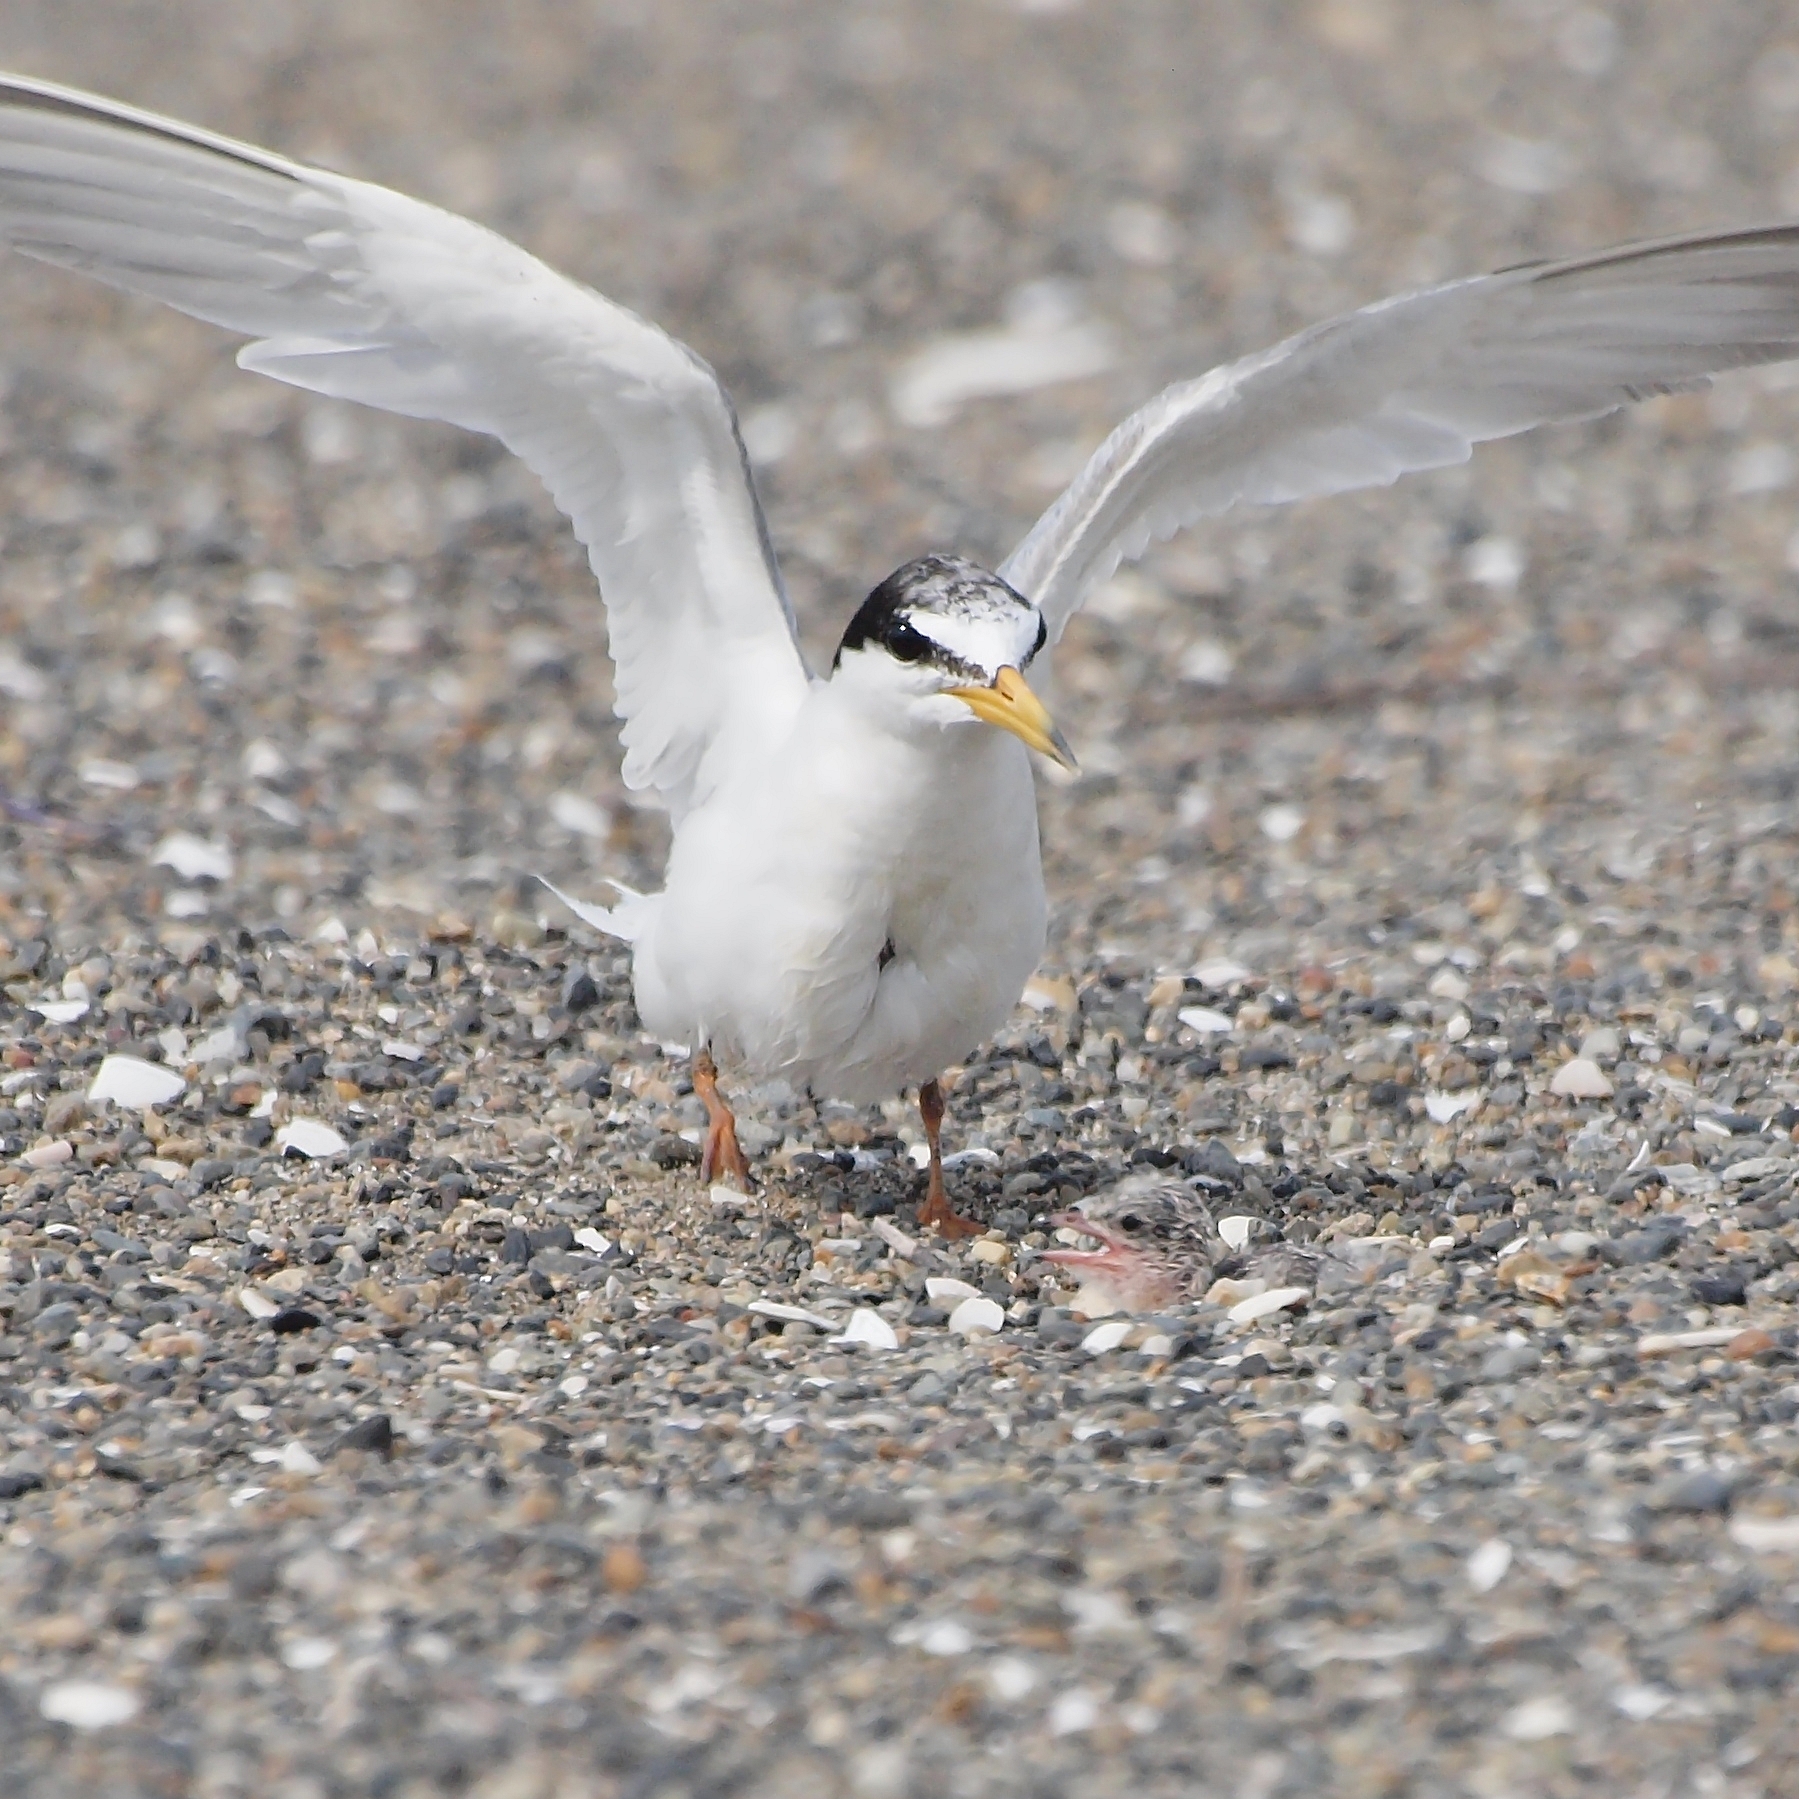 a white bird flying over gravel and pebbles